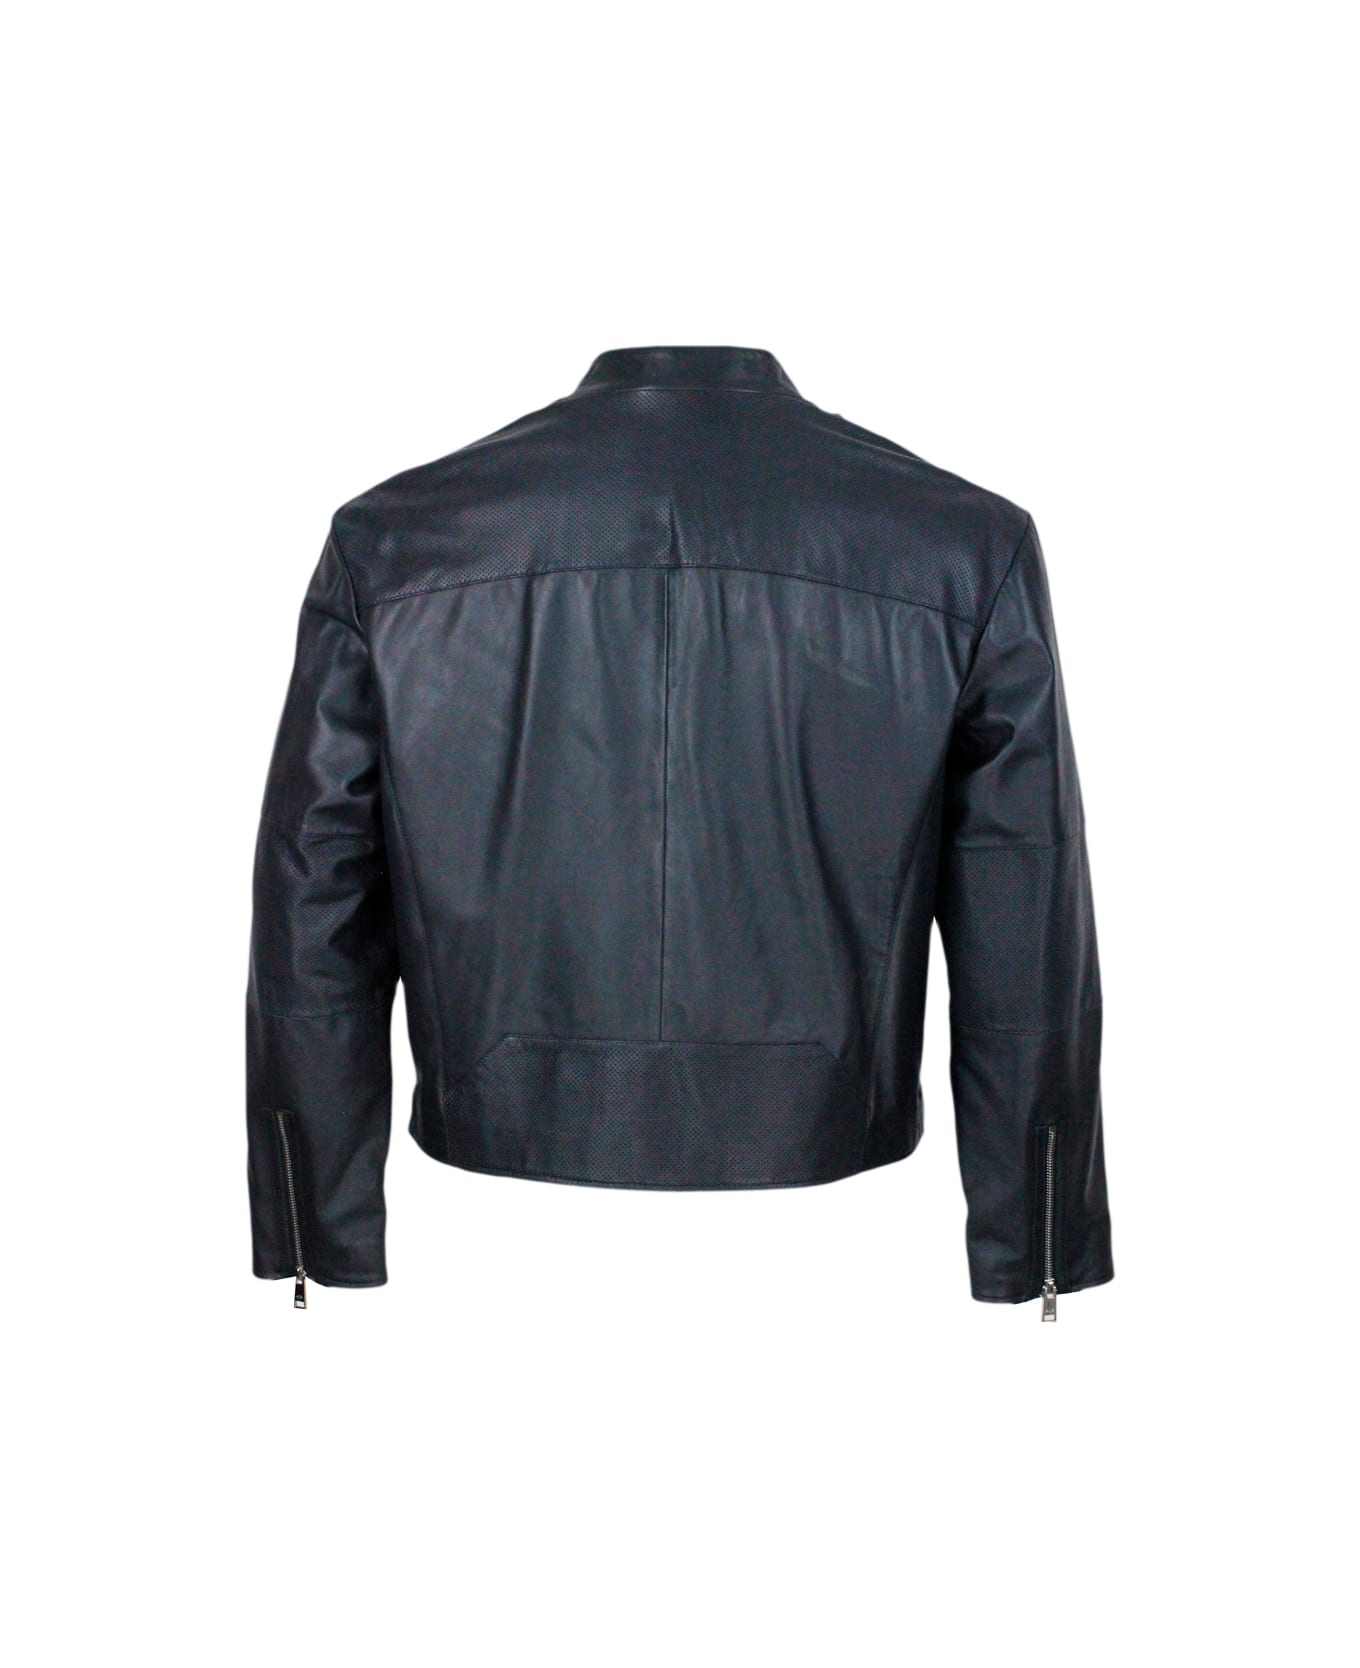 Armani Collezioni Jacket With Zip Closure Made Of Soft Lambskin With Perforated Leather Details. Zip On Pockets And Cuffs - Blu